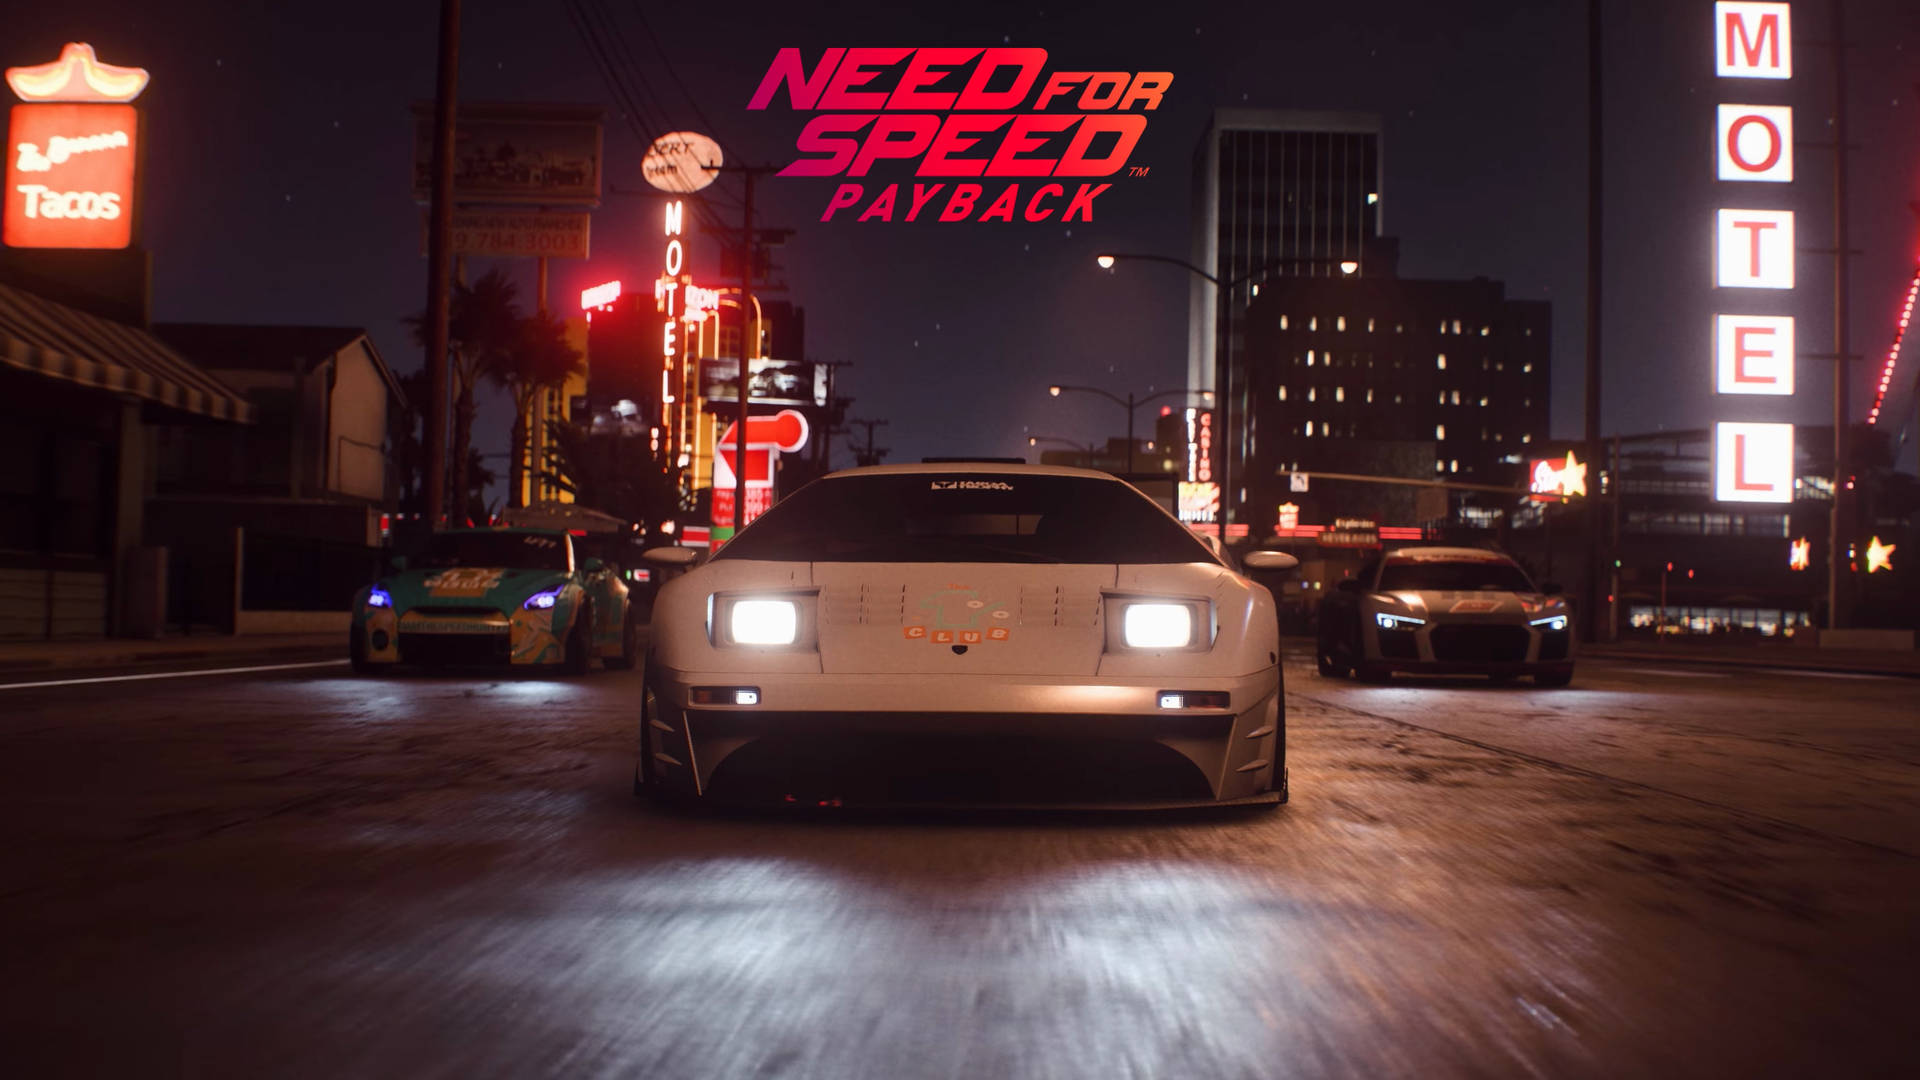 Stock Image: Intense Night Race In Need For Speed Payback Background